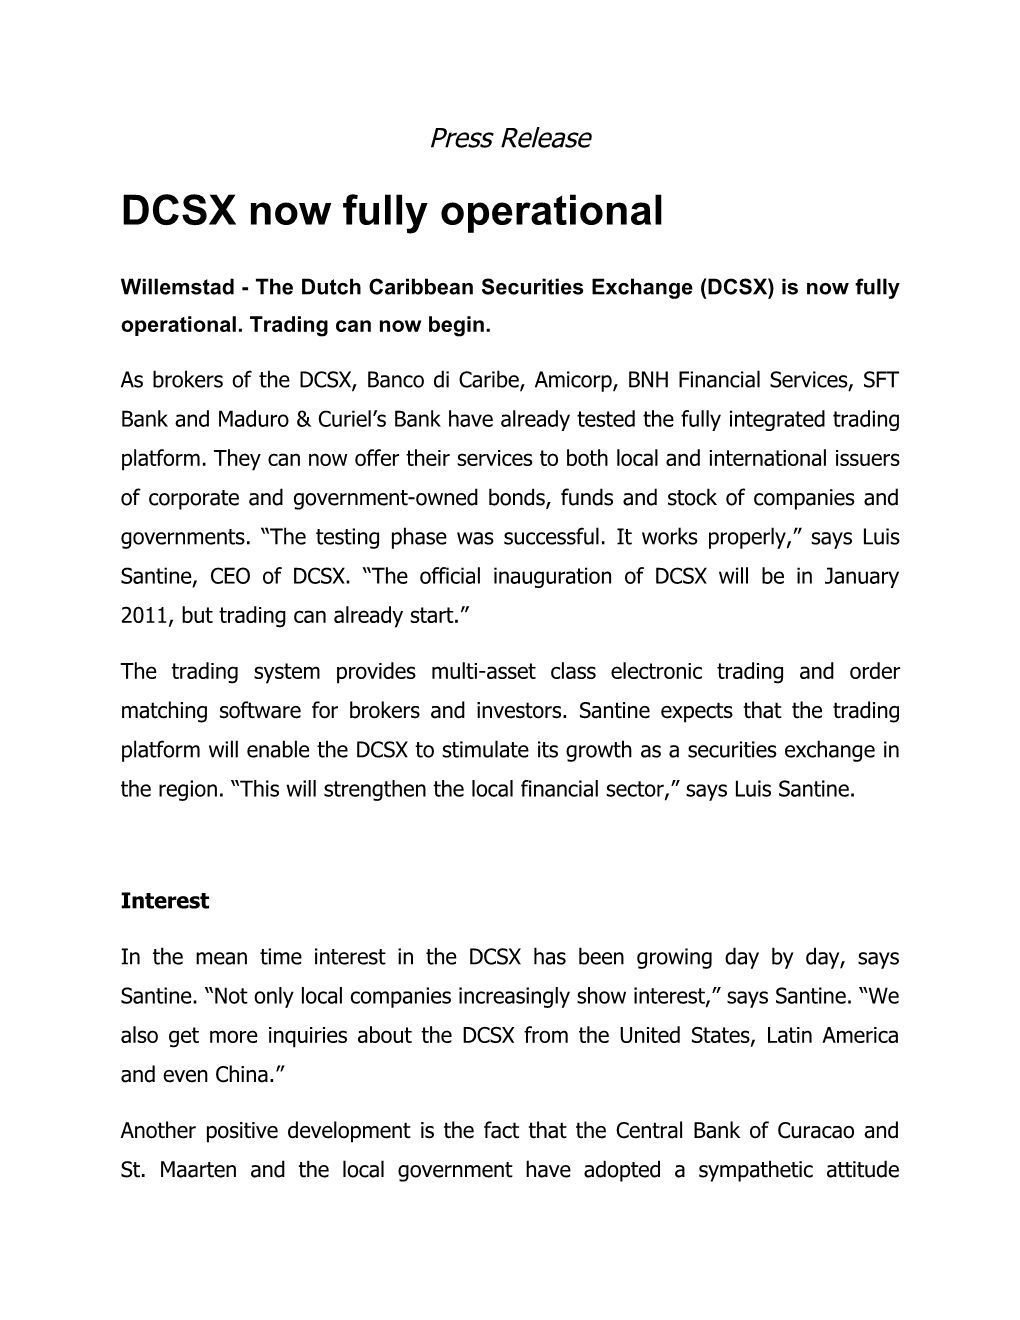 DCSX Now Fully Operational